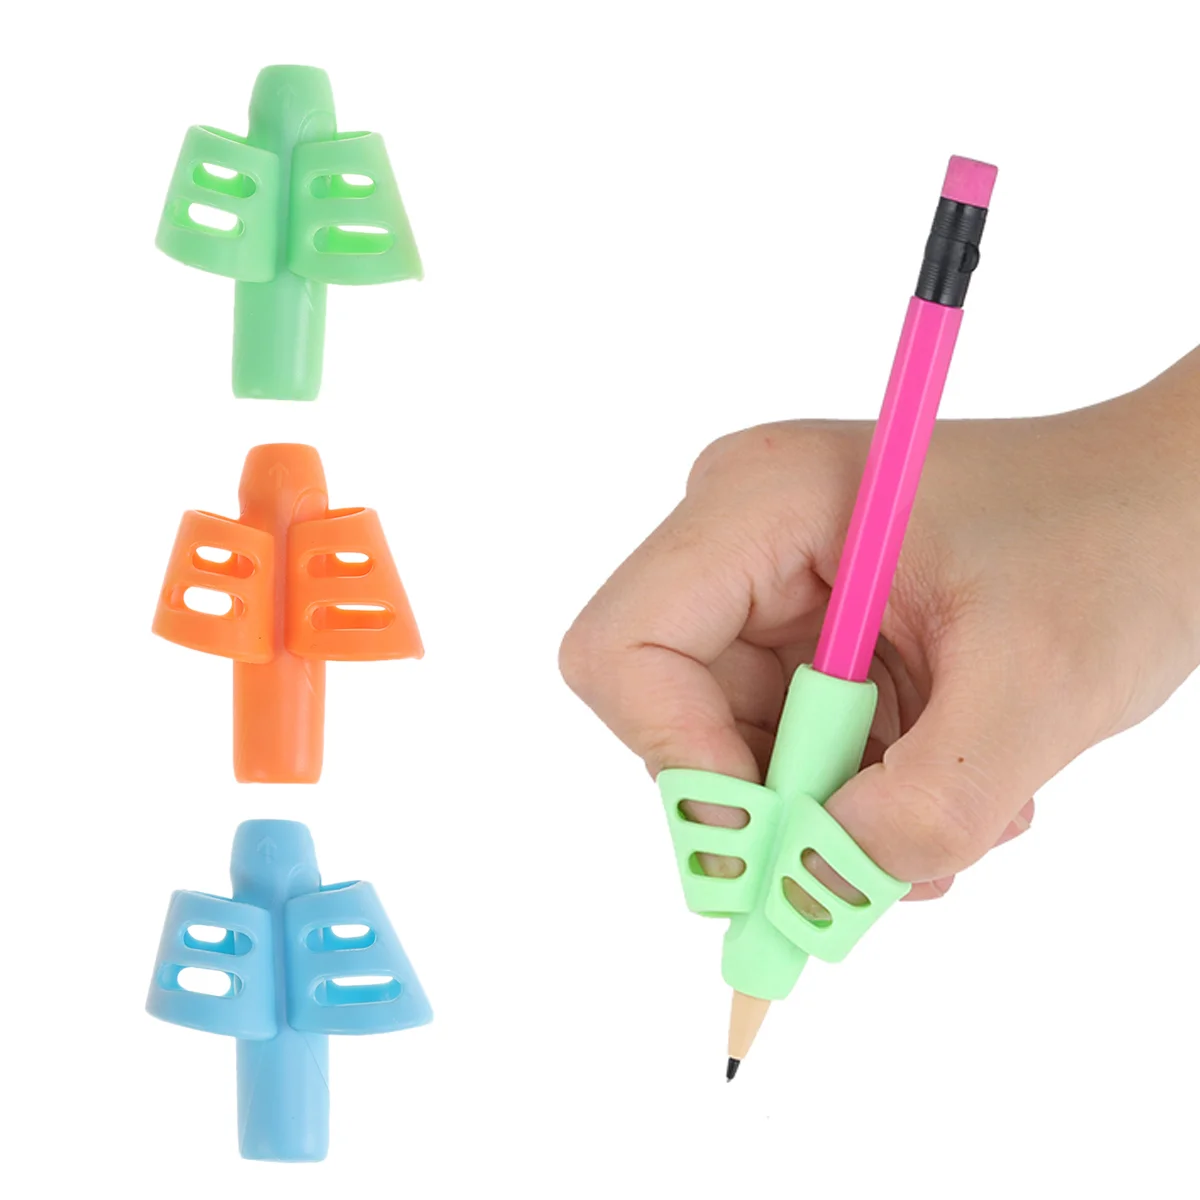 

6pcs Silicone Double Fingers Pen Holder Writing Trainer Aid Aid Grip Writing Posture Corrector Tool for Kids Preschoolers